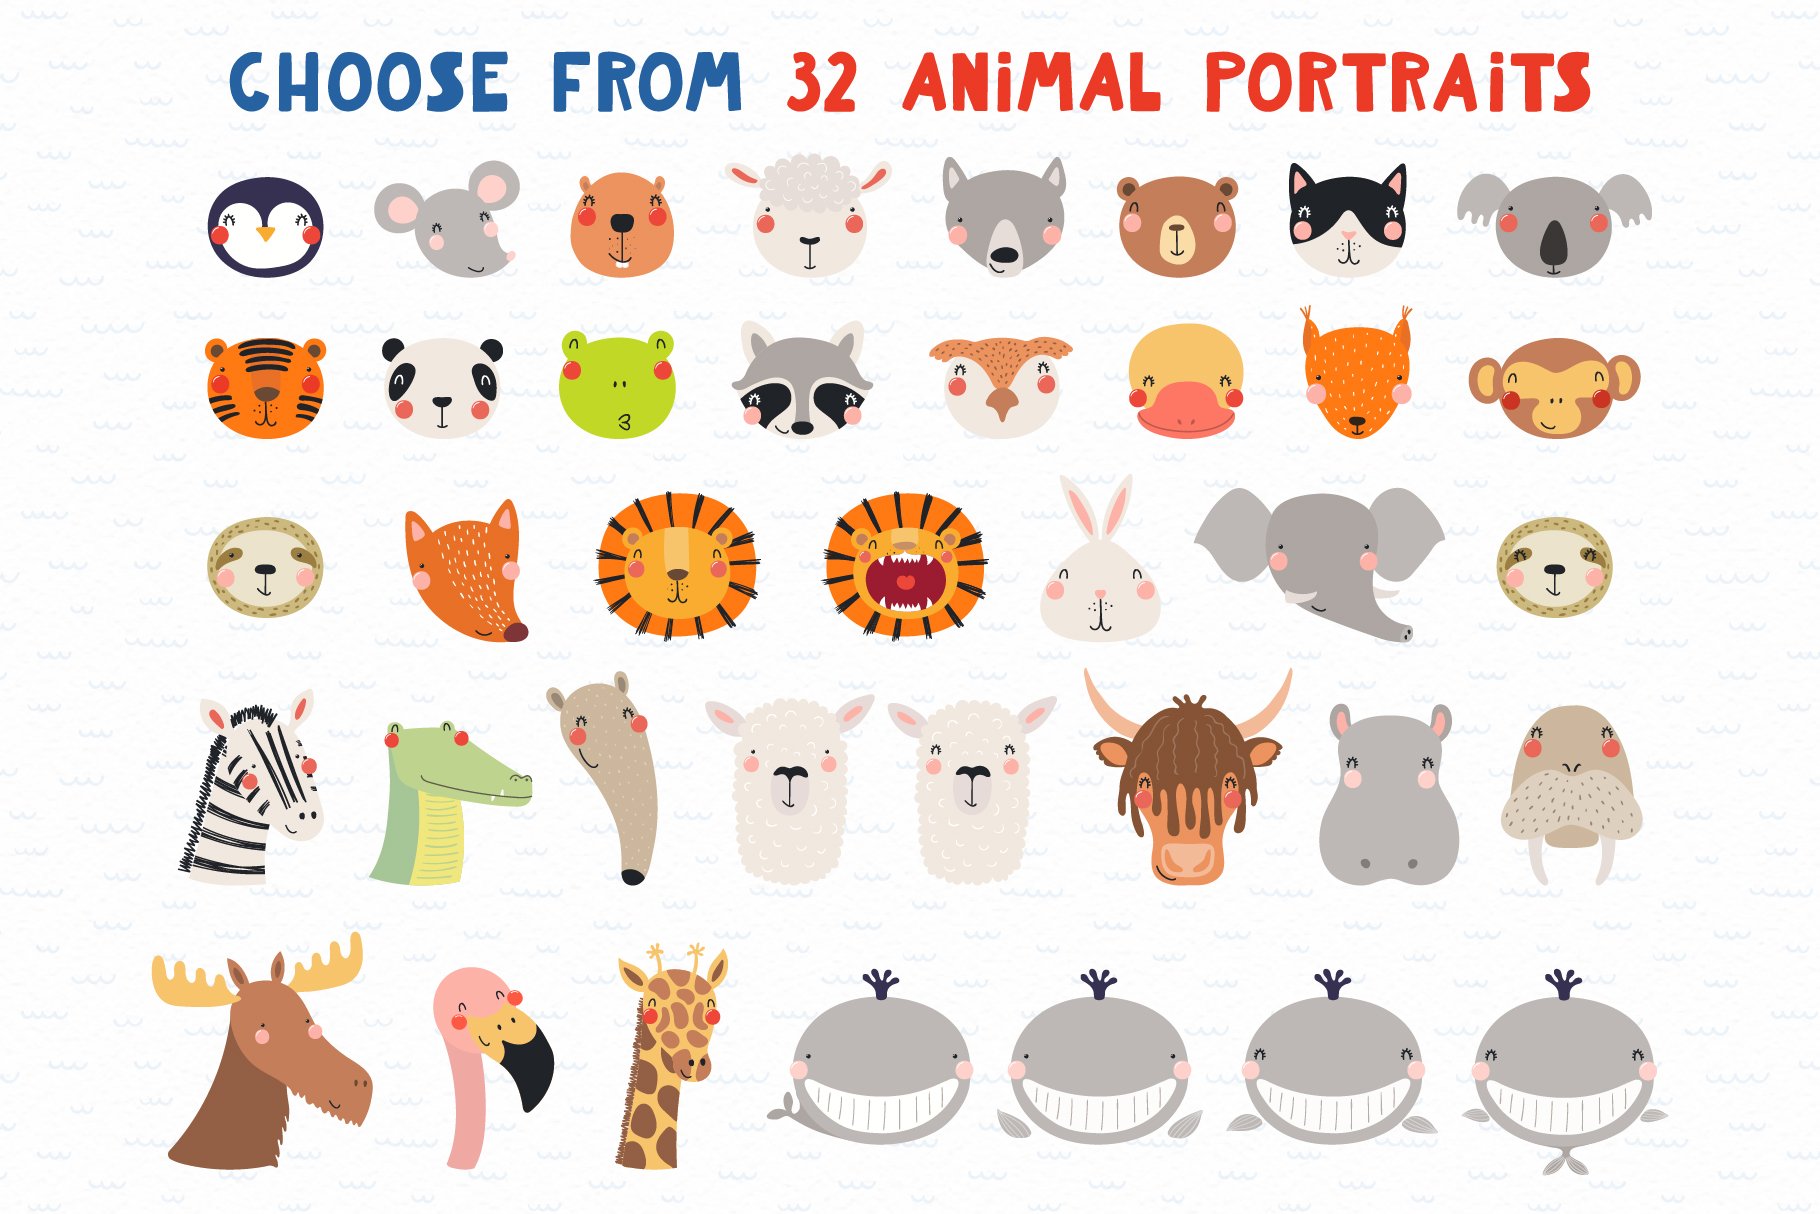 Cool colorful collection of animal portraits.